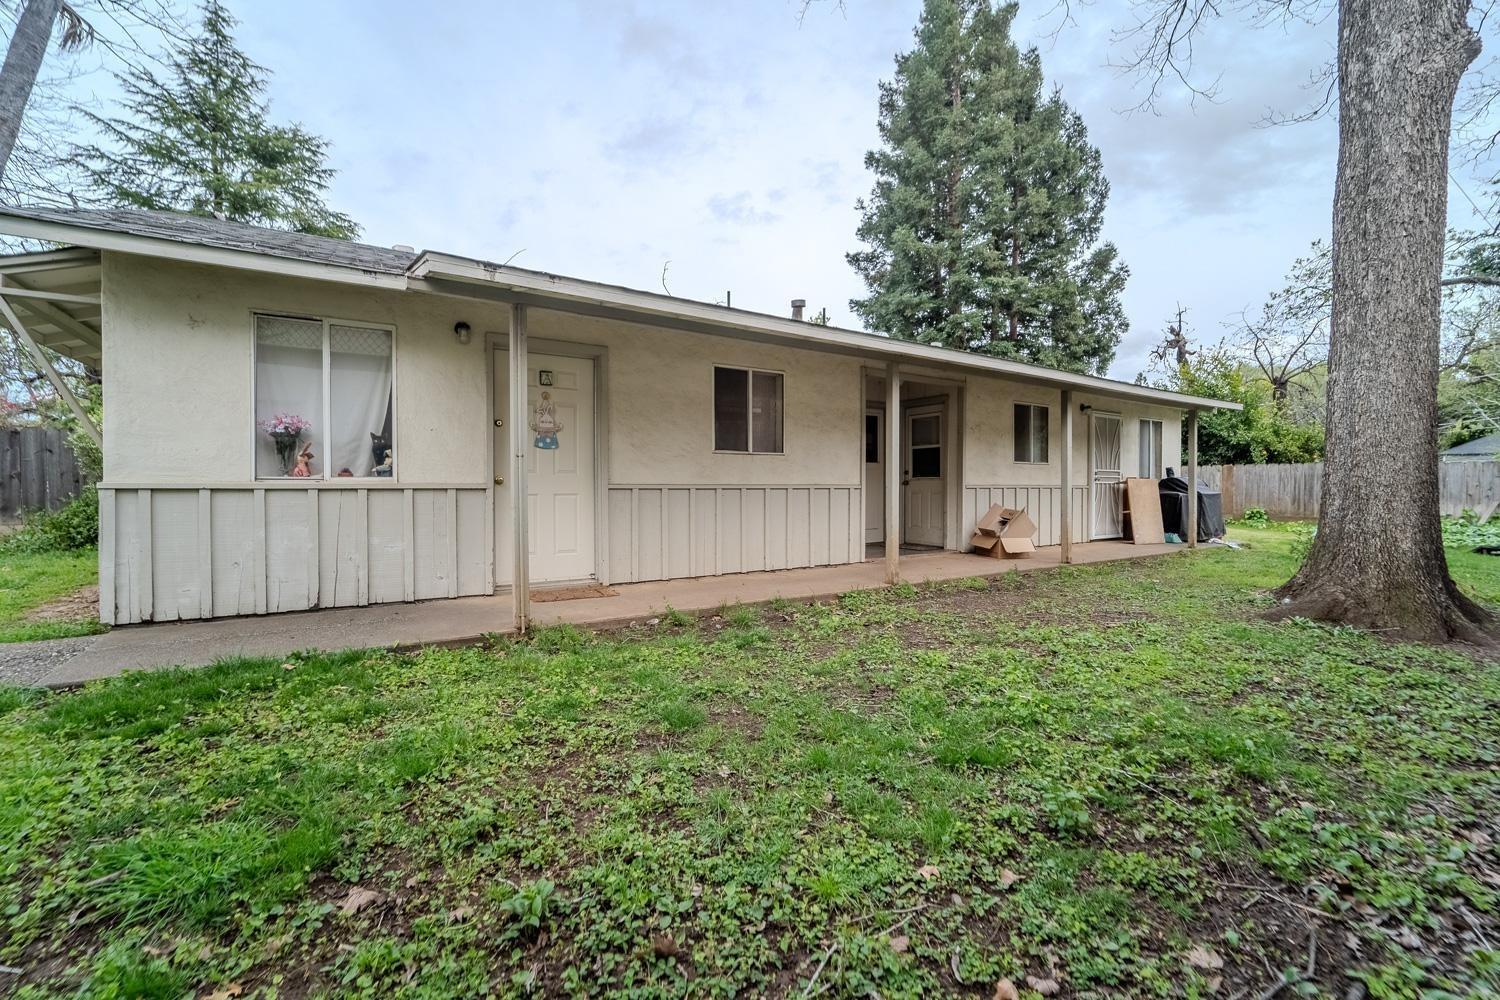 Photo of 1425 W 7th St in Chico, CA